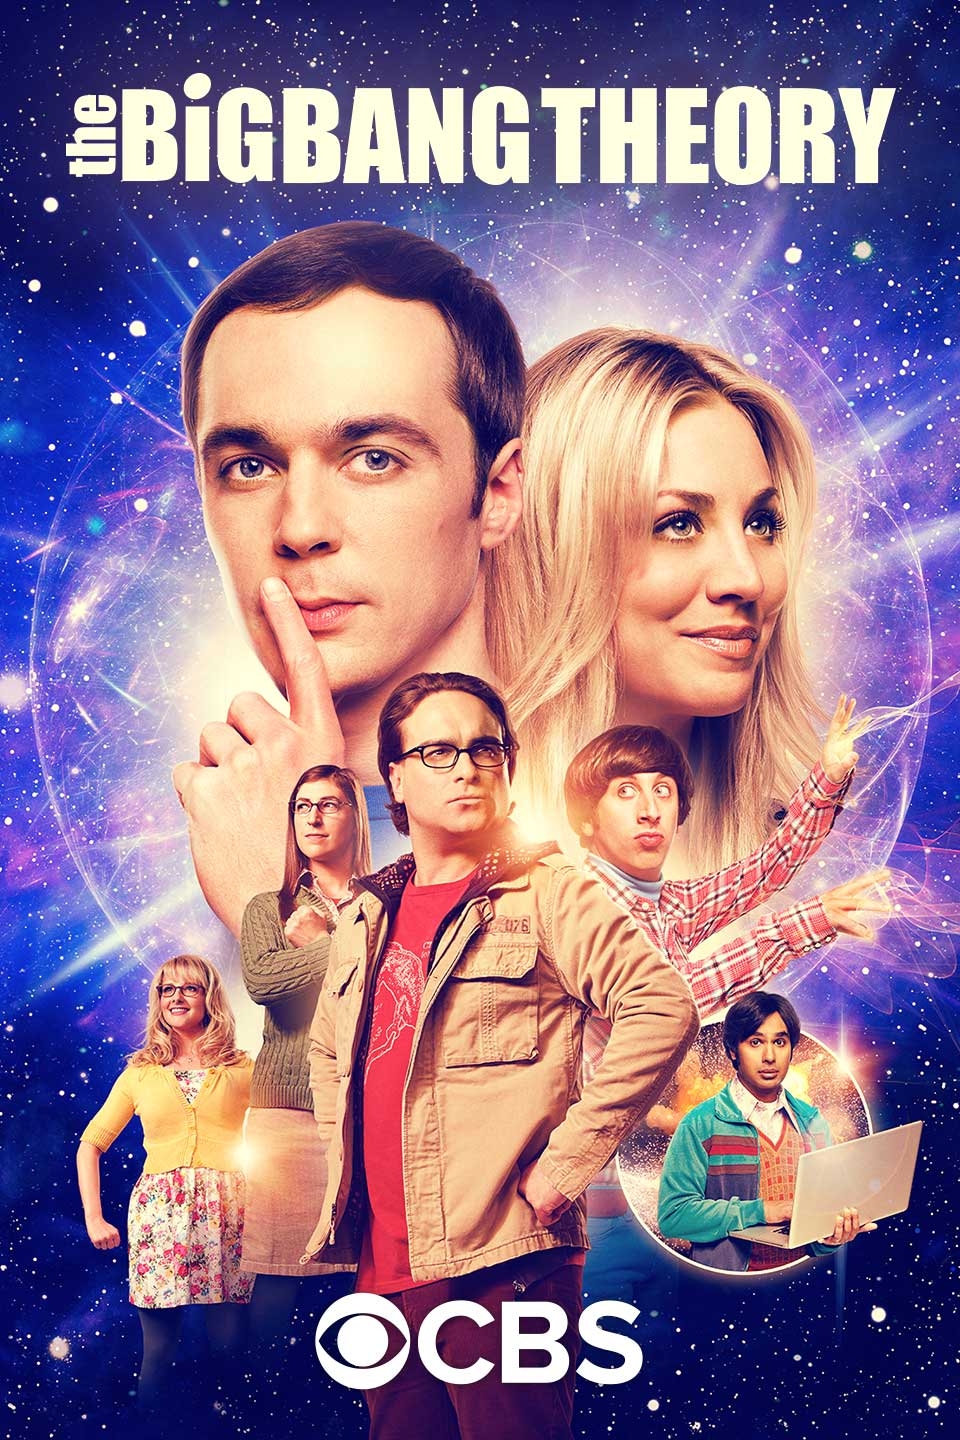 https://static.wikia.nocookie.net/bigbangtheory/images/b/bc/The_Big_Bang_Theory.png/revision/latest?cb=20220202223210